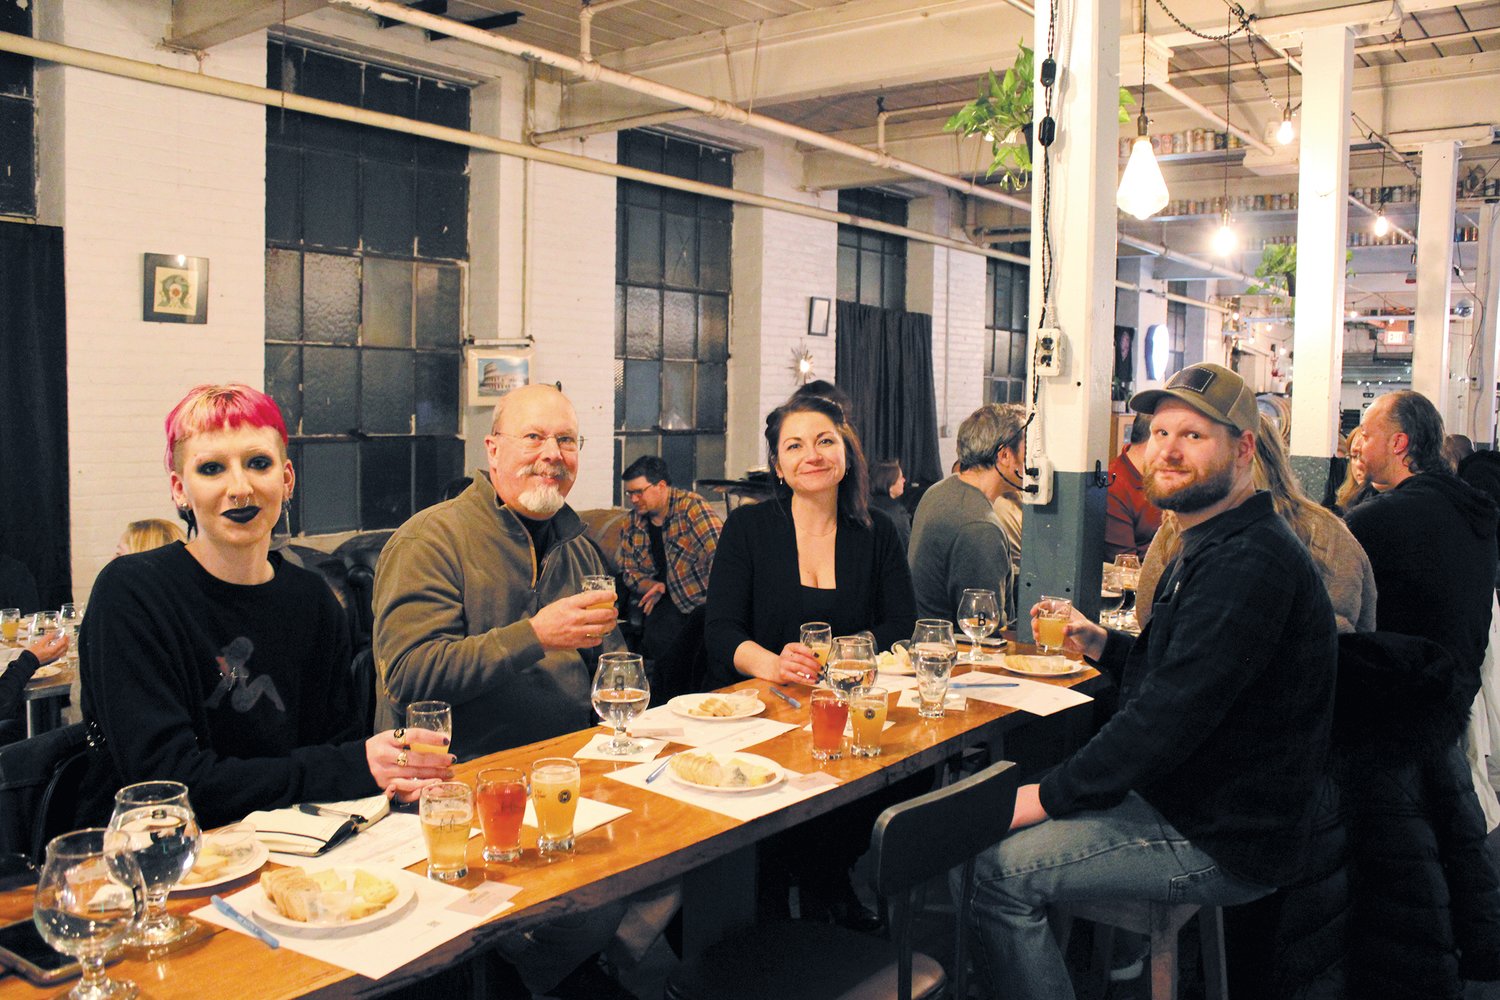 ENJOYING THE NIGHT: Laine Hodgkinson, DJ Johnson, Katie Truchon and James Freeman (left to right) take their time discussing and making notes while enjoying the tasting.